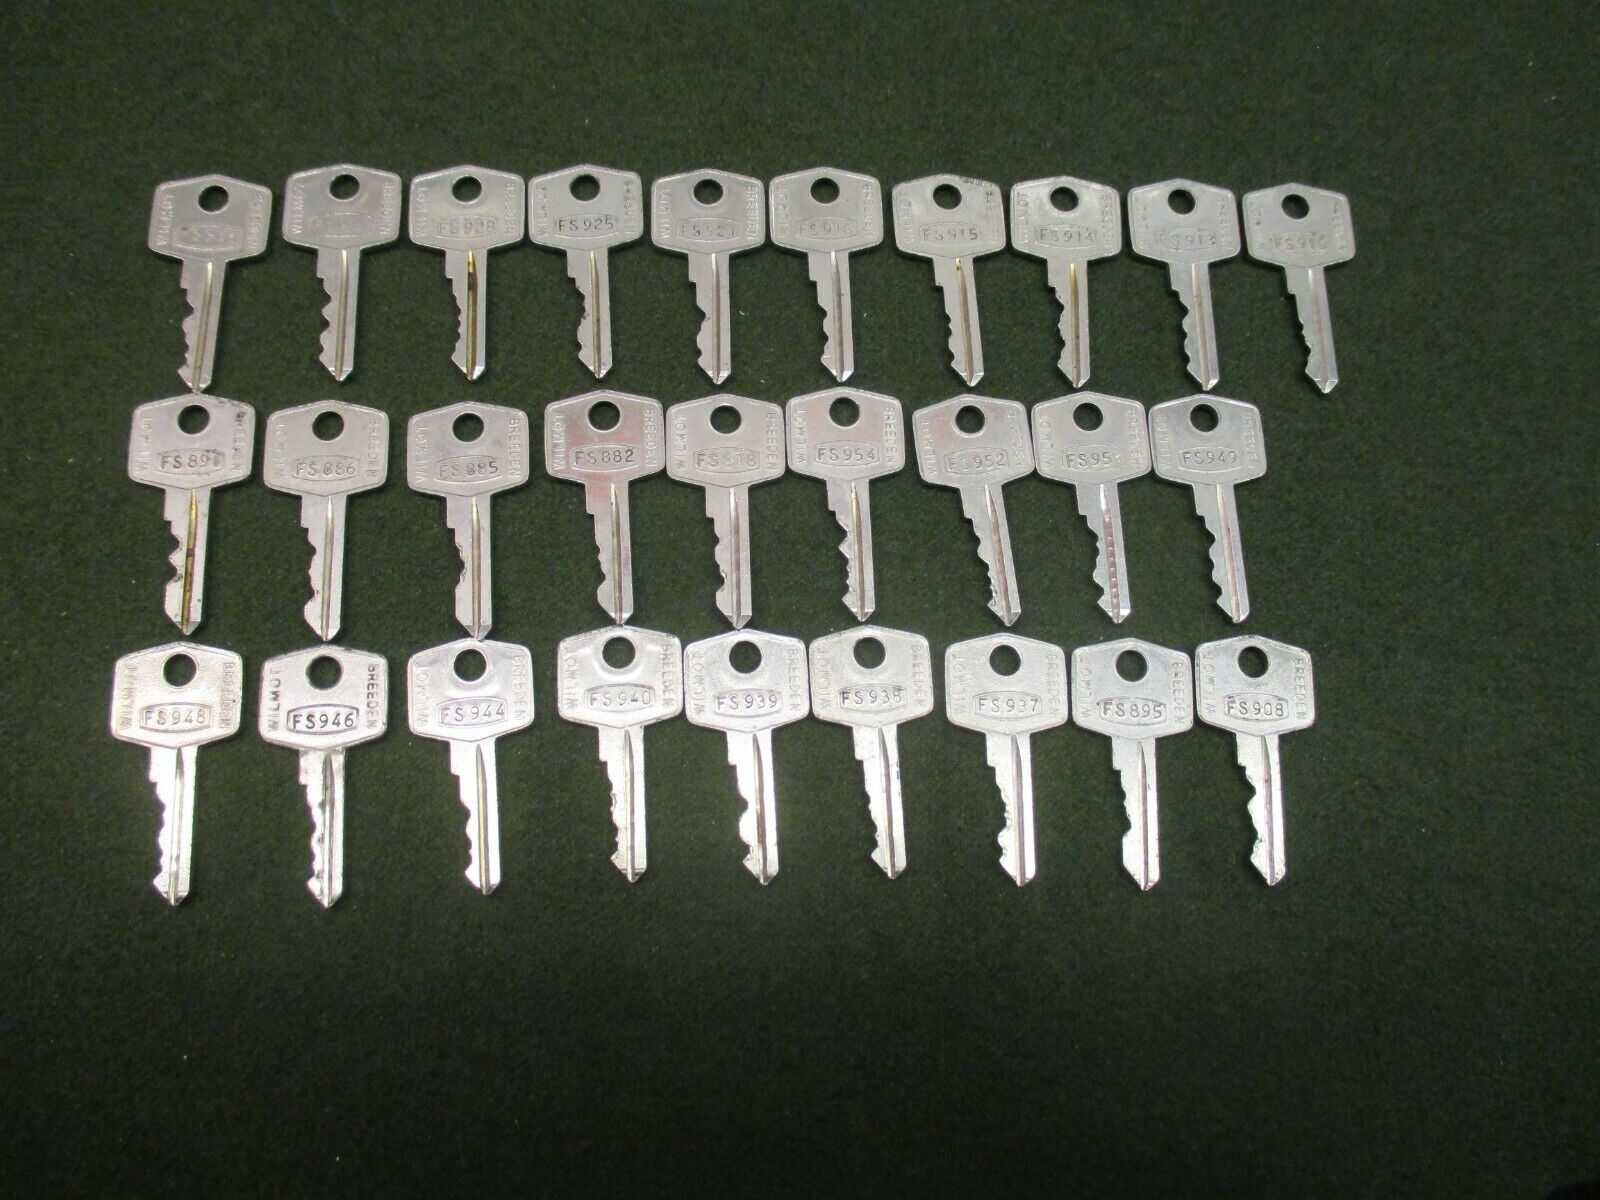  WILMOT BREEDEN UNION KEYS MADE IN ENGLAND LISTING IS FOR 1 KEY CHOICE NOS OEM